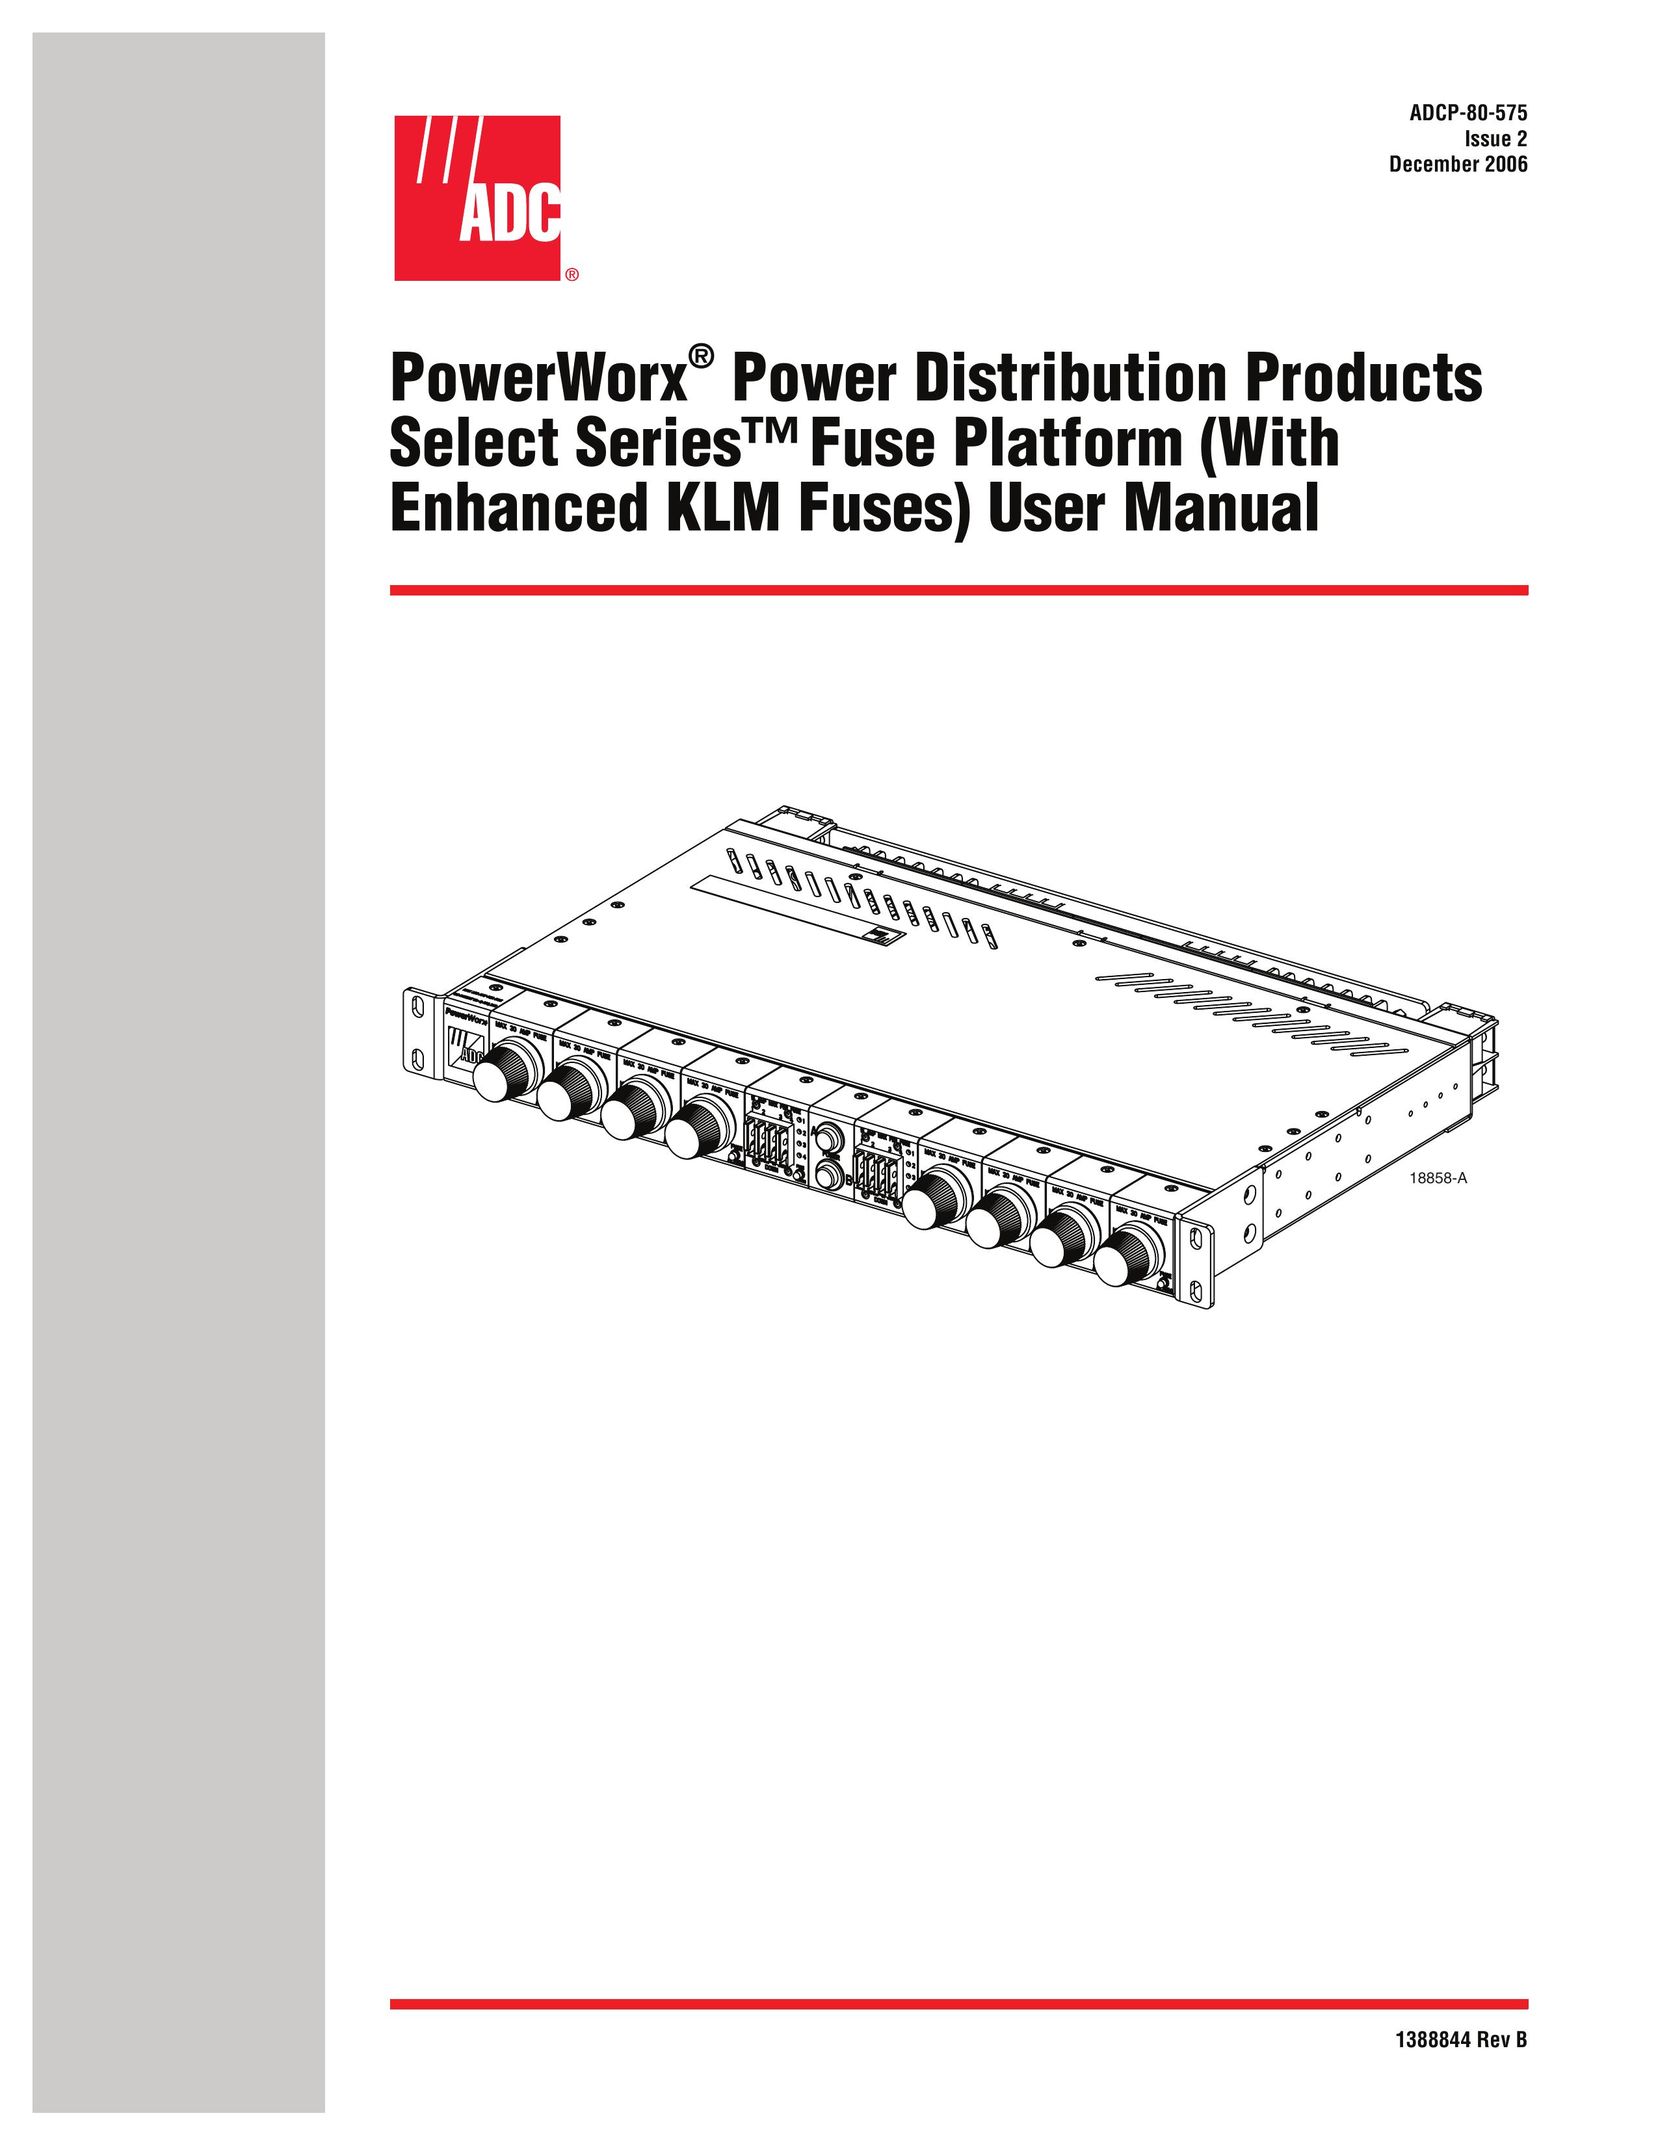 ADC Power Distribution Power Supply User Manual